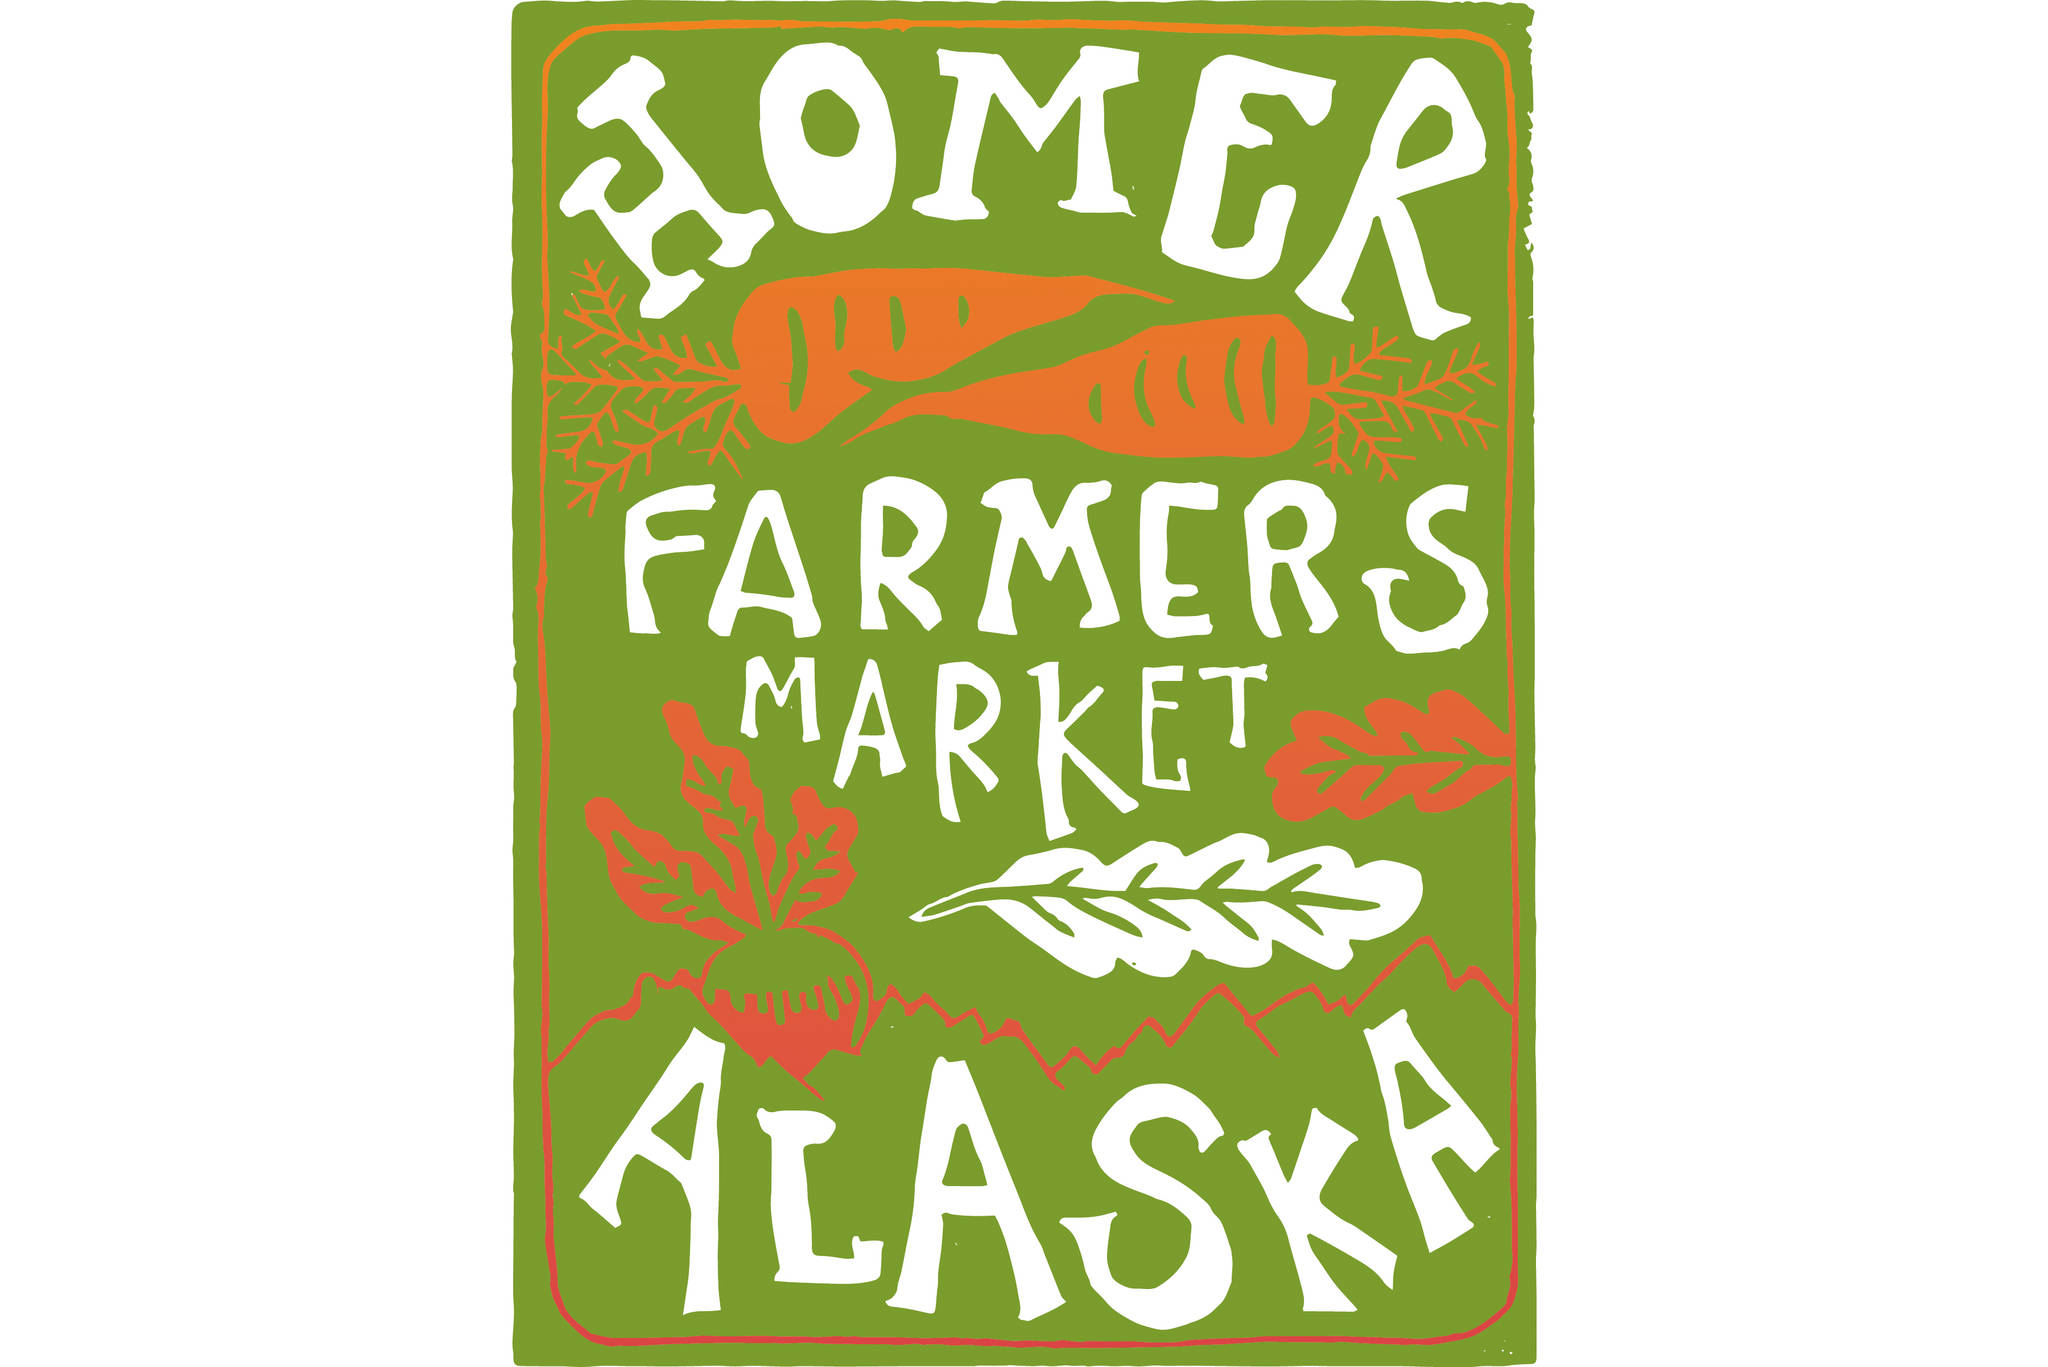 Homer Farmers Market: Fresh Market food can be invaluable — but also cheaper than big stores